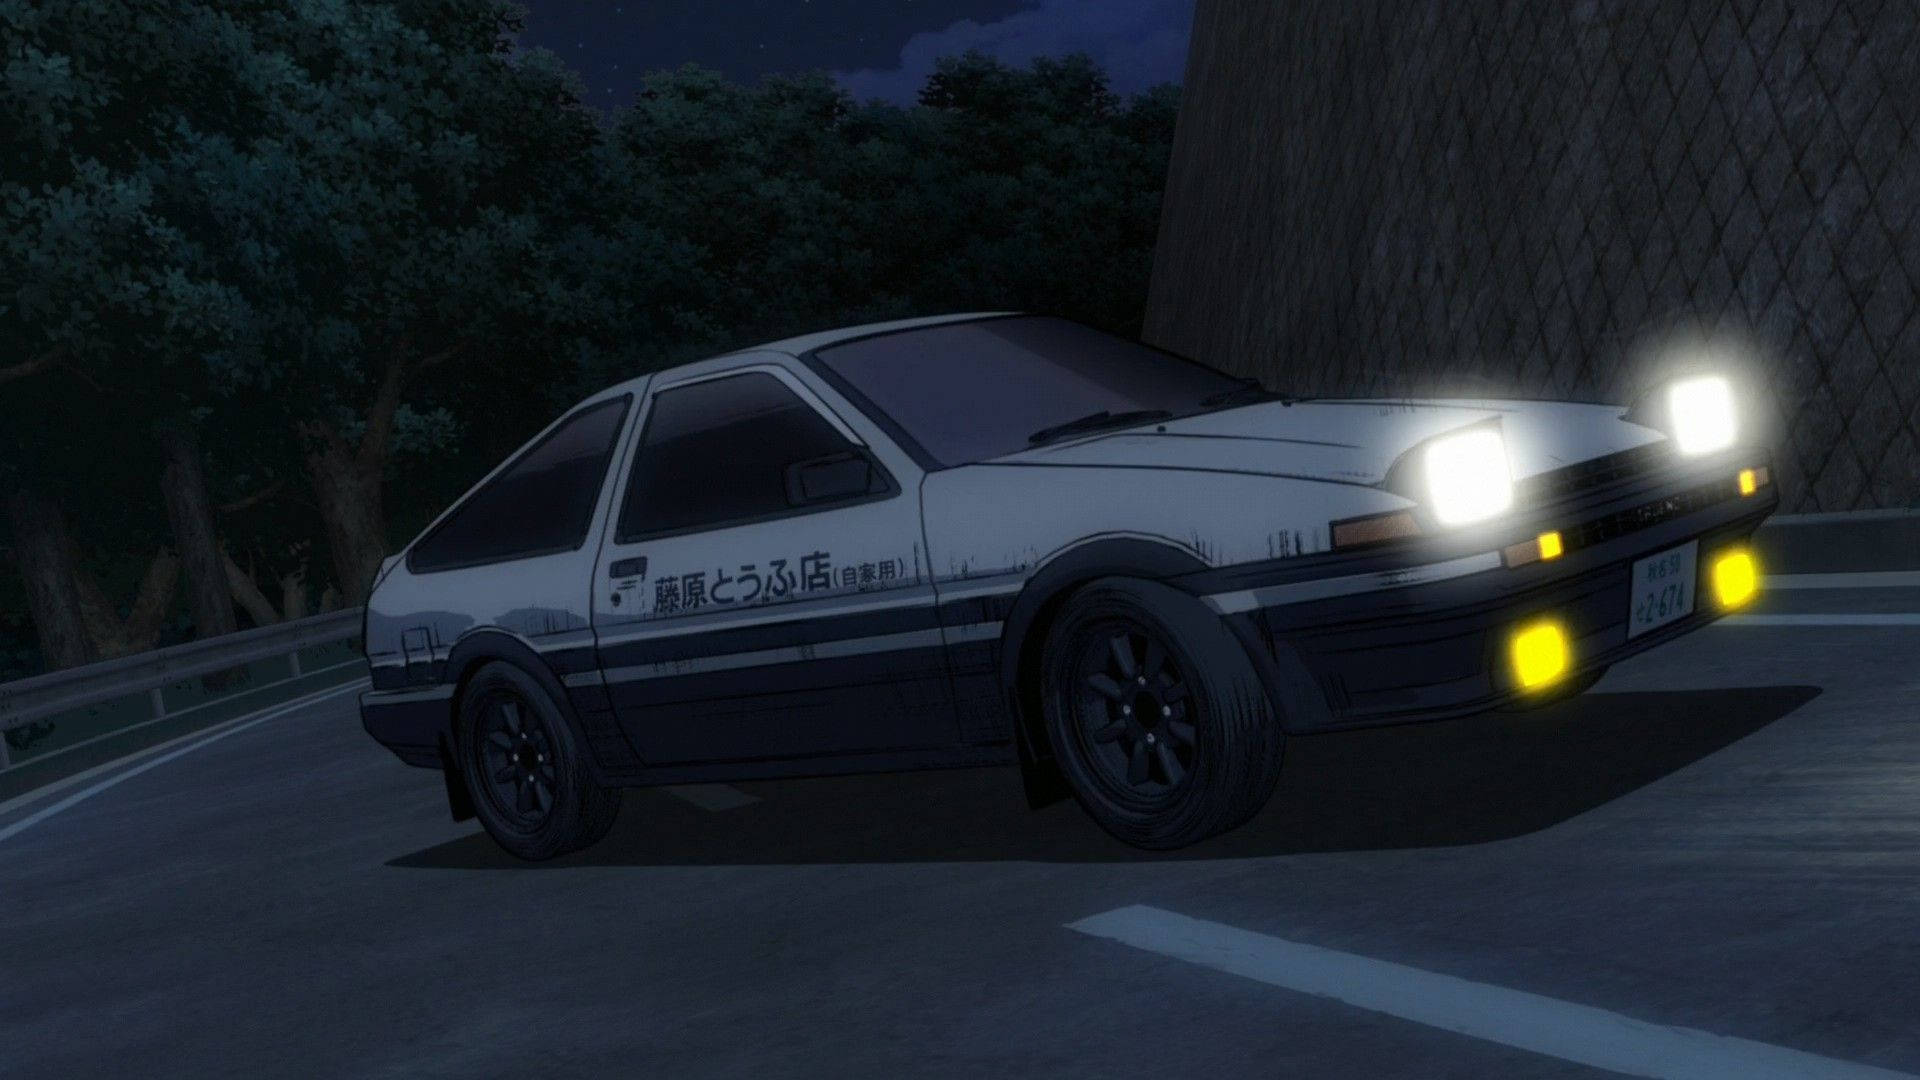 Ready to Race in Initial D Wallpaper